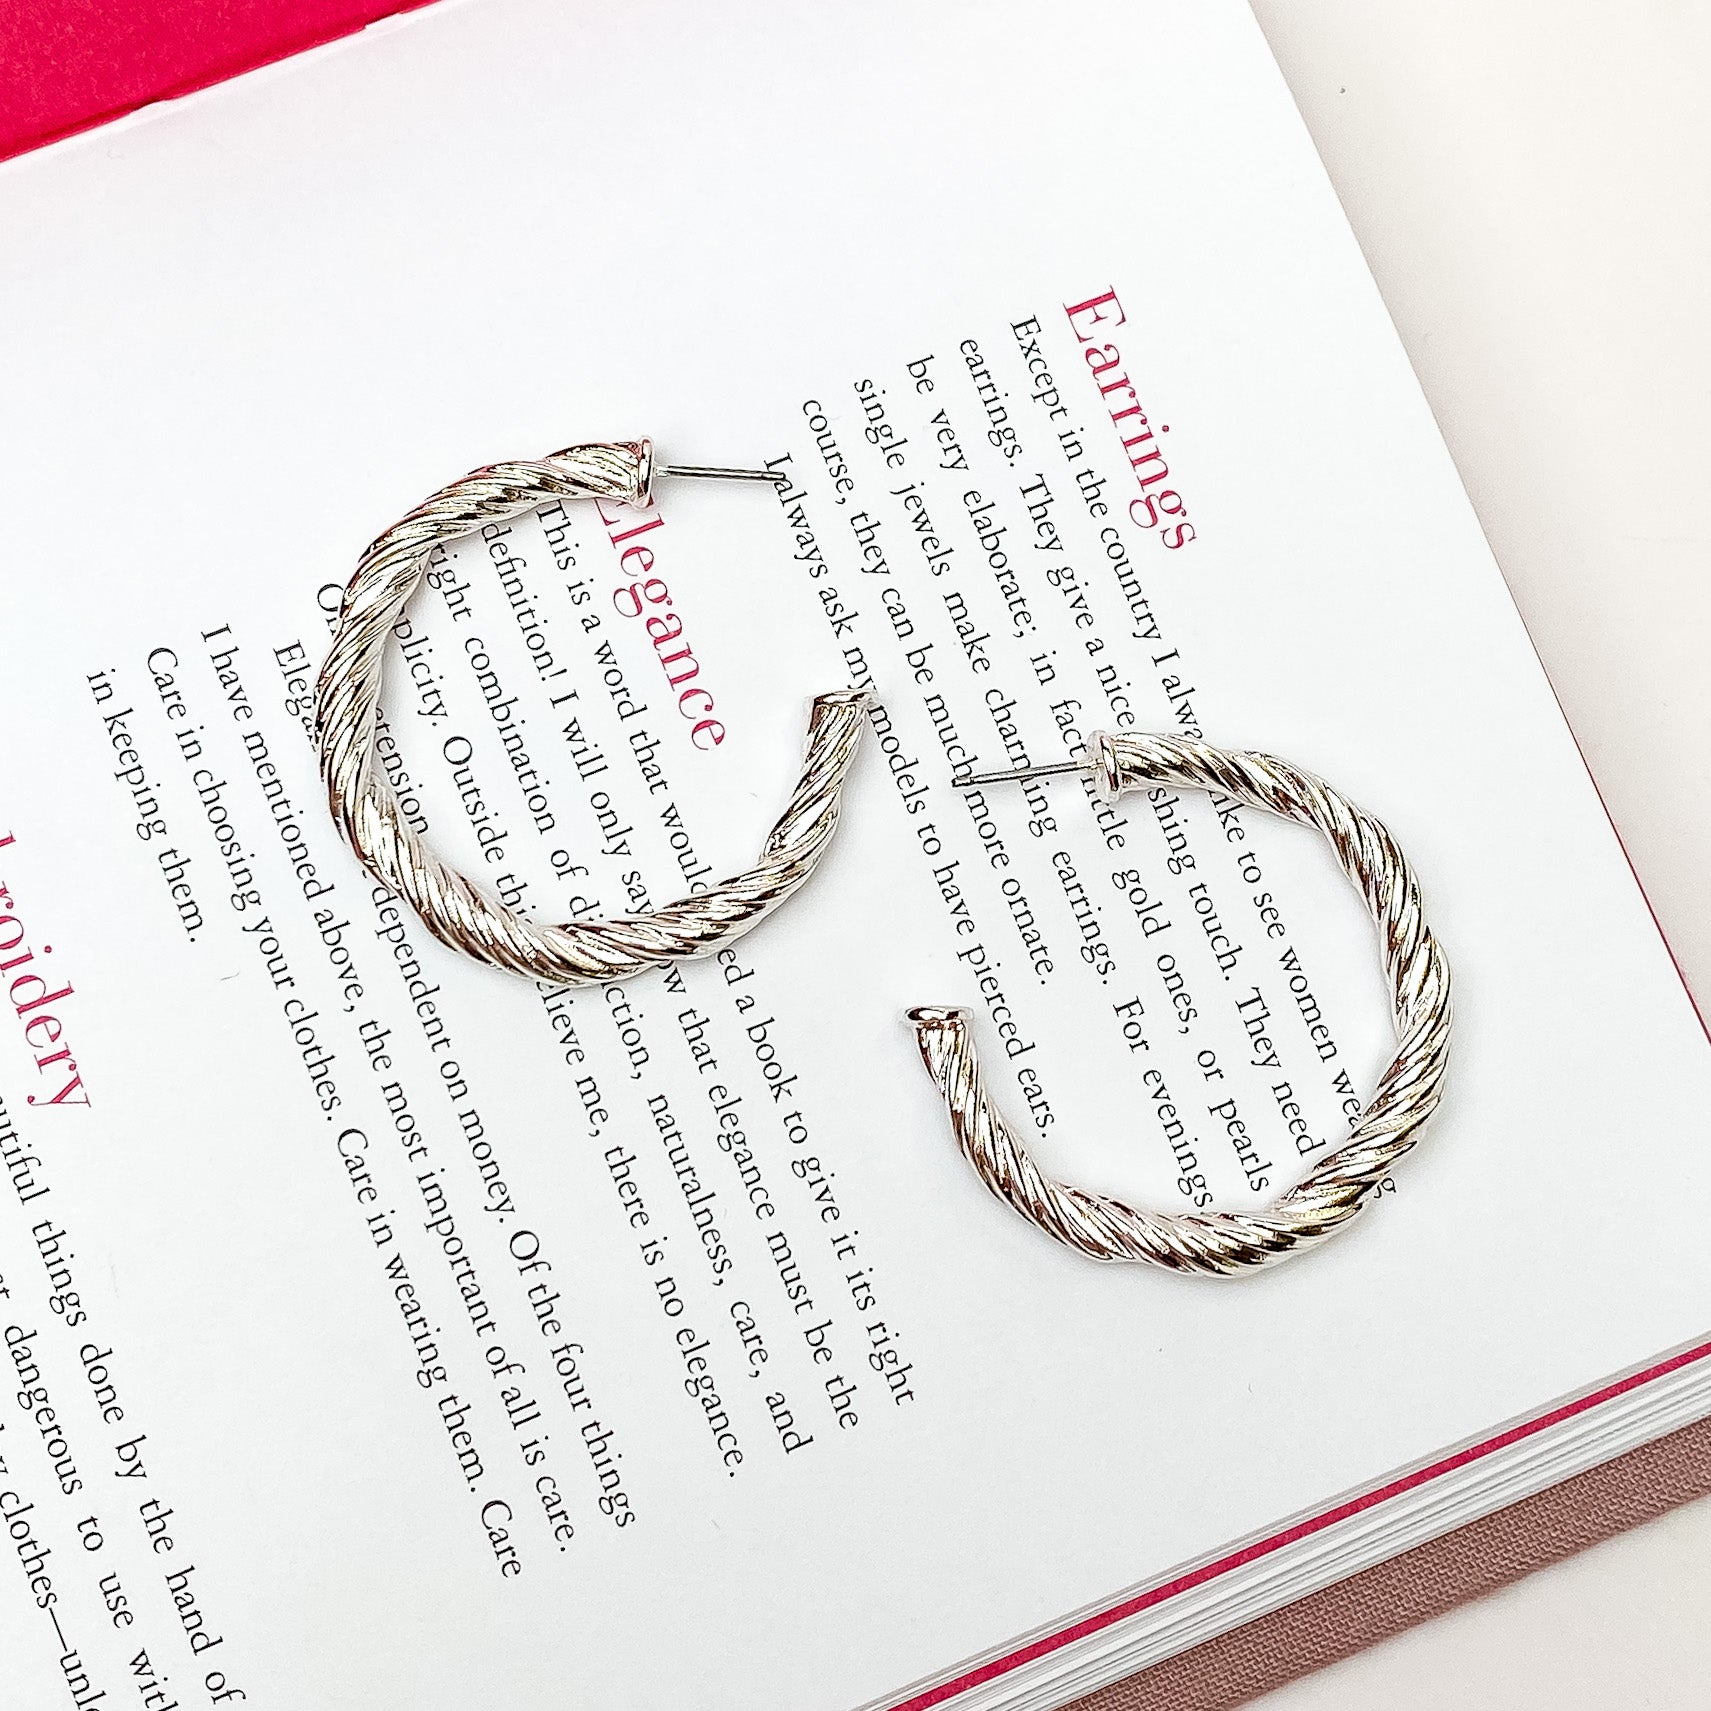 Silver twisted hoop earrings. These earrings are pictured on a open book on a white background. 